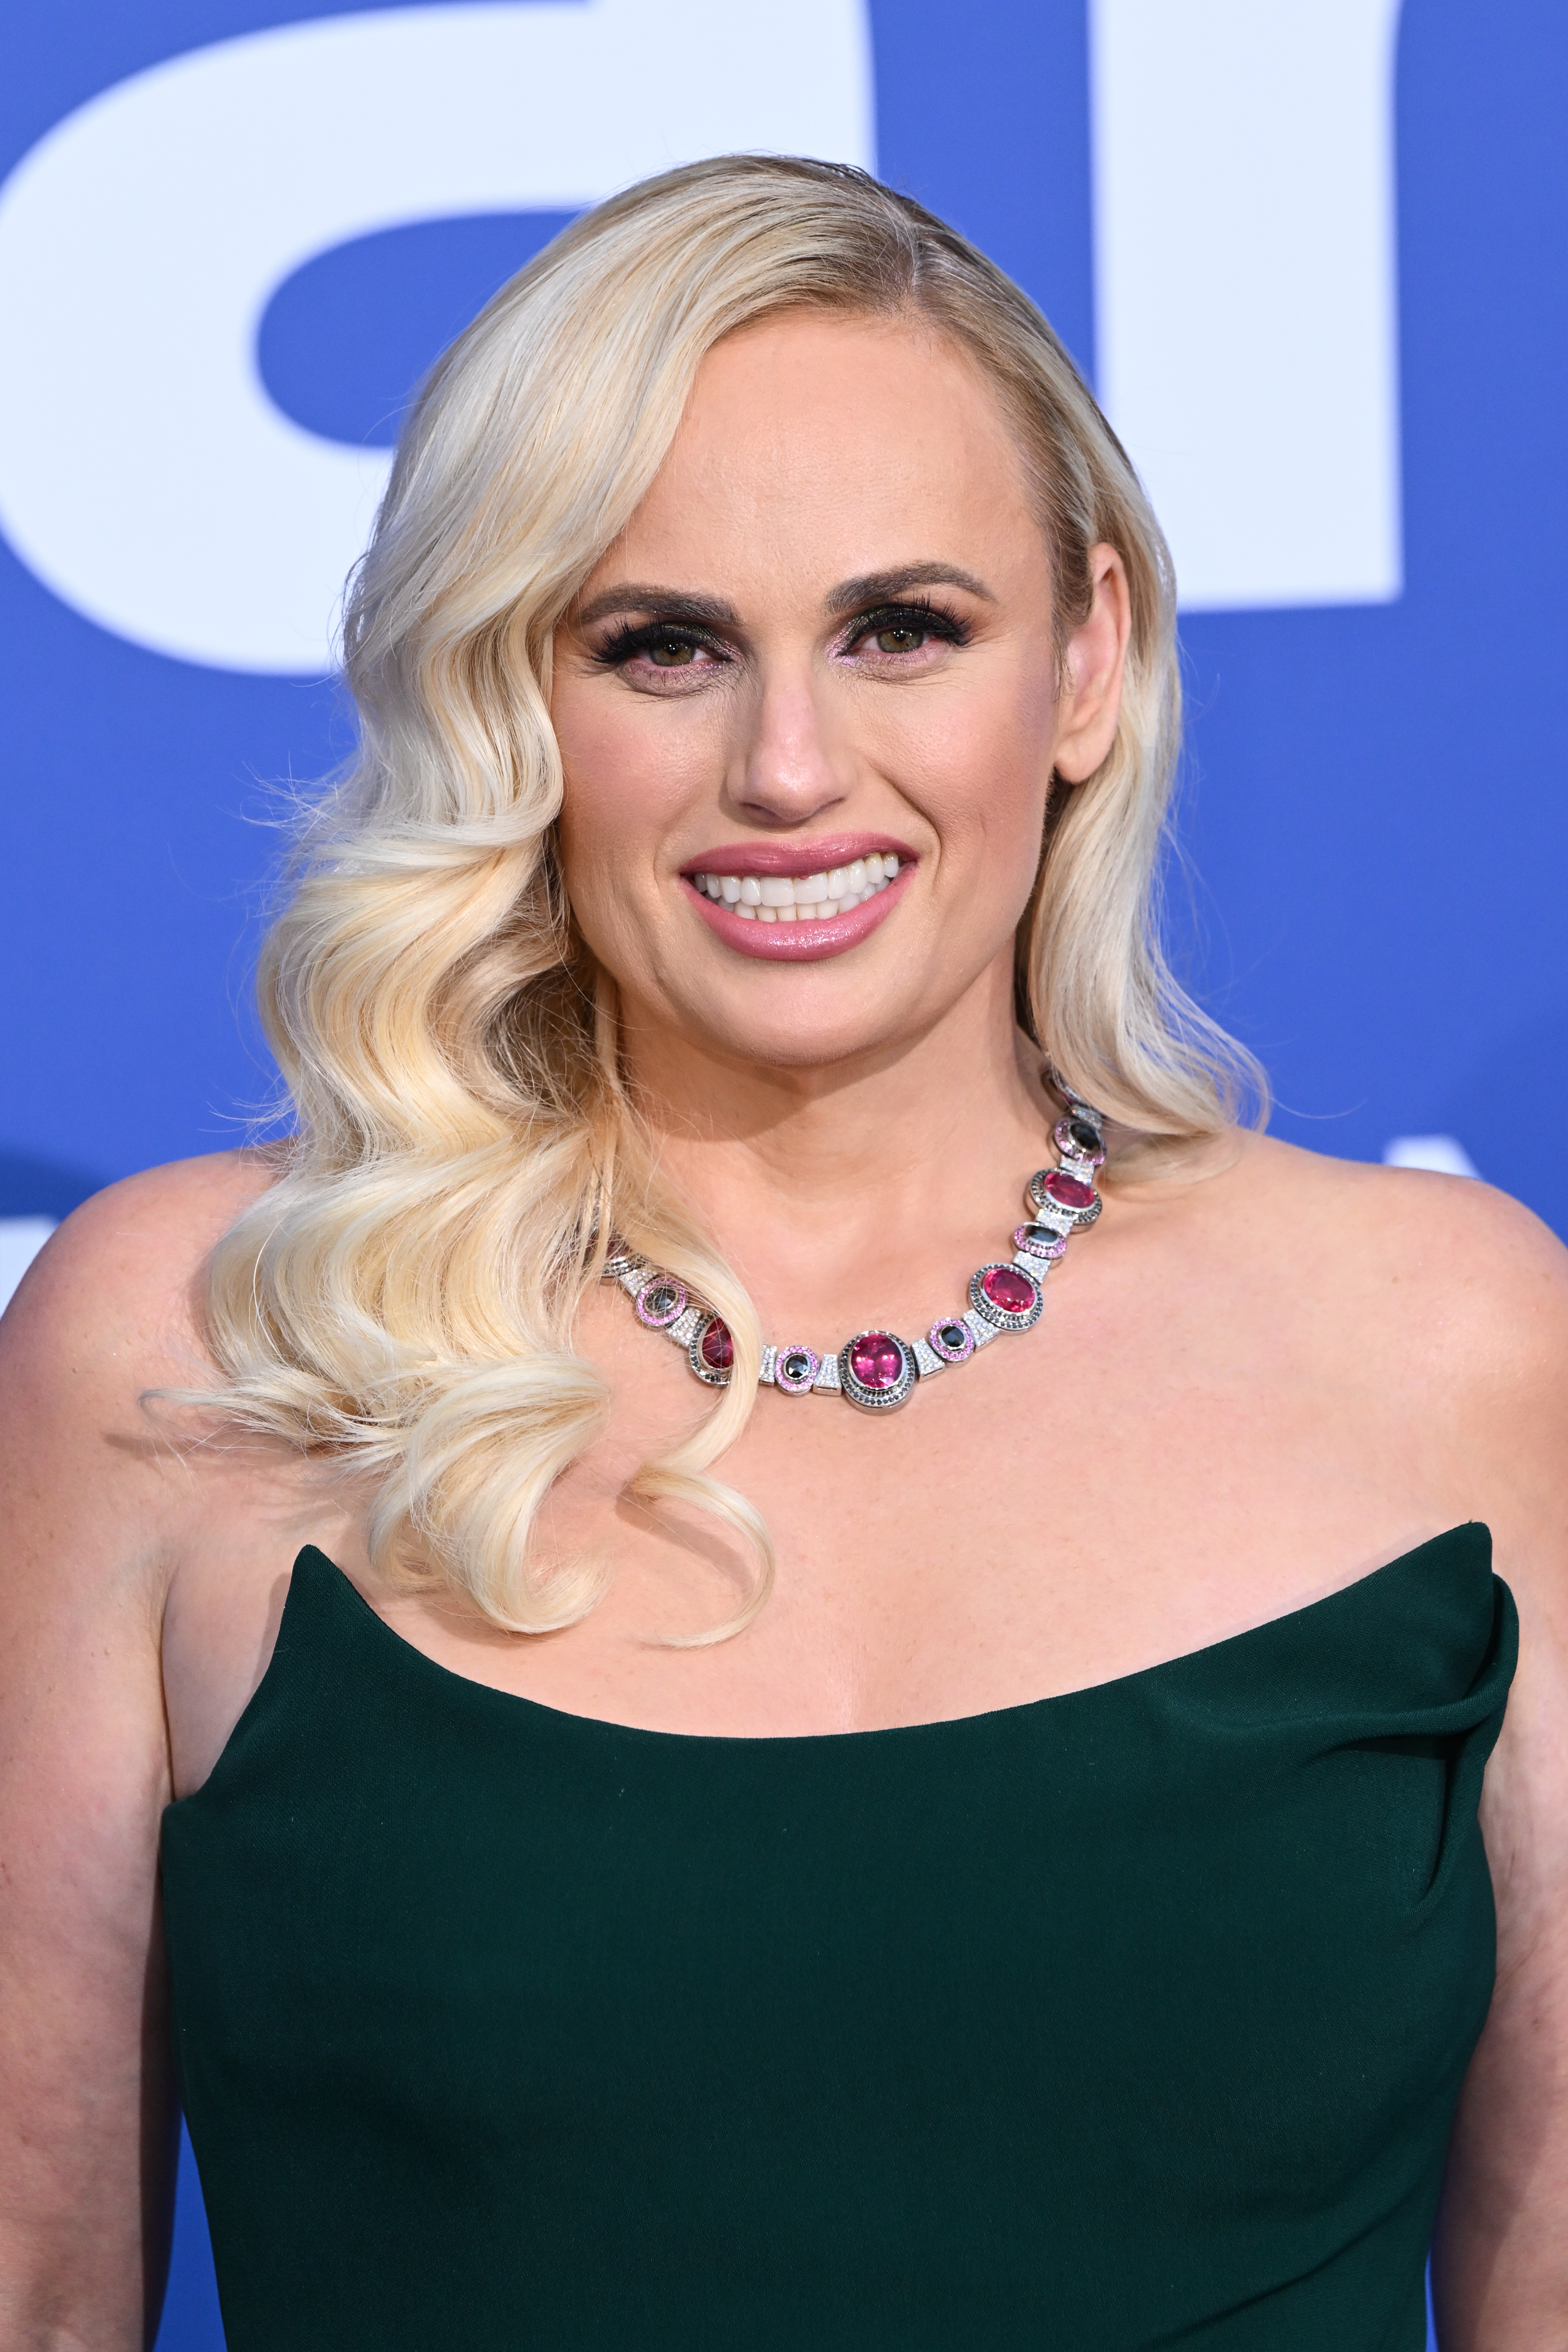 Rebel Wilson in a strapless dress with a multi-colored stone necklace on the red carpet